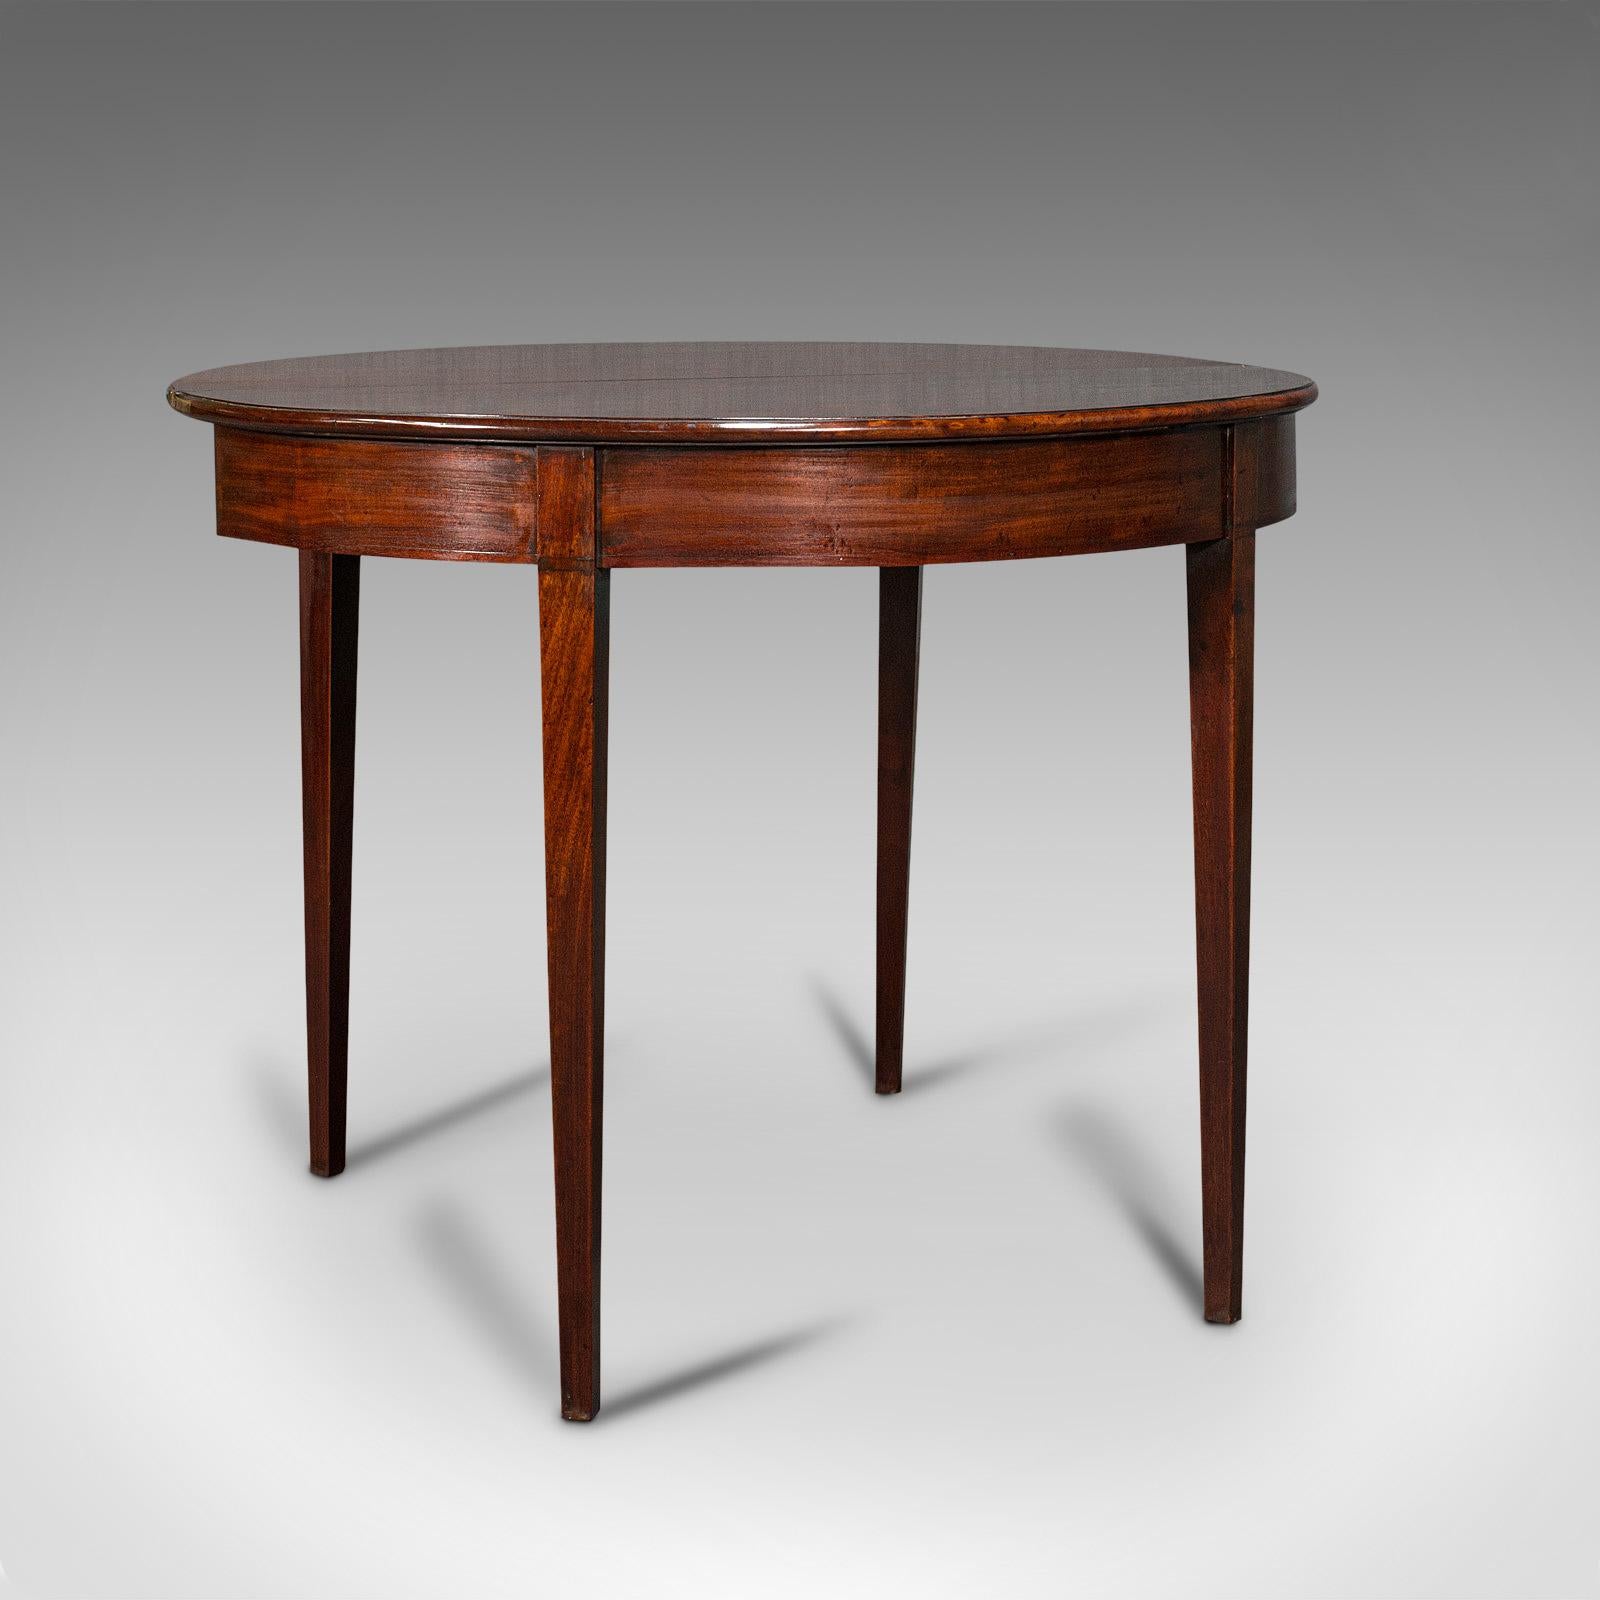 This is an antique folding tea table. An English, mahogany demi-lune side or breakfast table, dating to the Georgian period, circa 1800.

Graced with fine stocks and appealing colour
Displaying a desirable aged patina throughout
Select mahogany